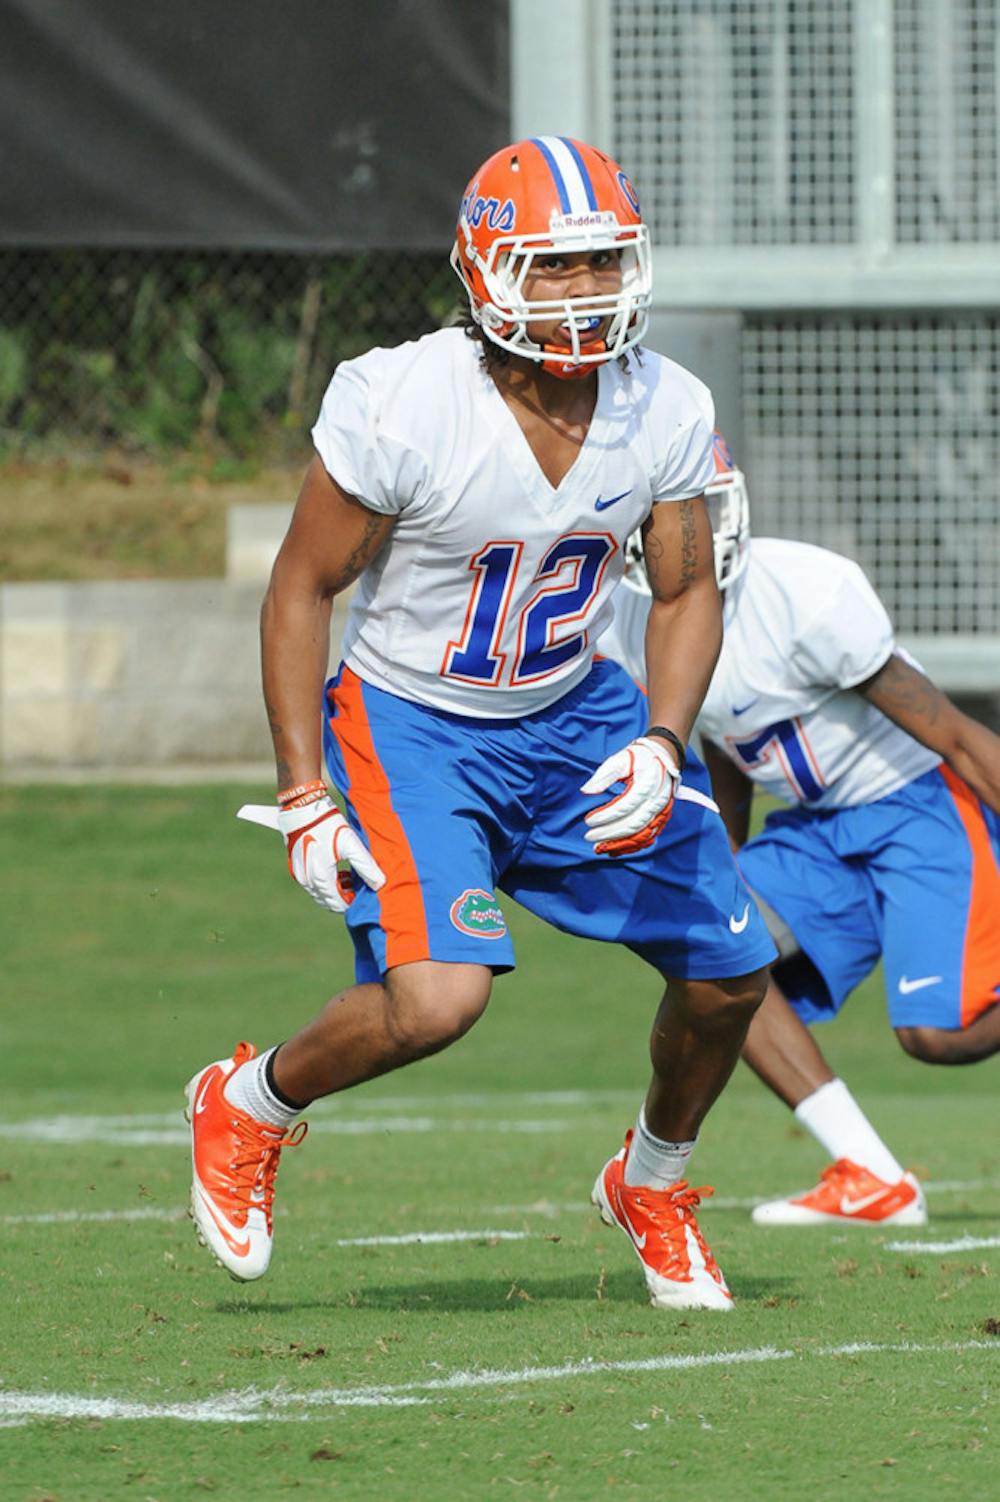 <p align="justify">Antonio Morrison runs through drills during a spring practice in 2012. Will Muschamp reduced Morrison’s suspension from two games to one Monday.</p>